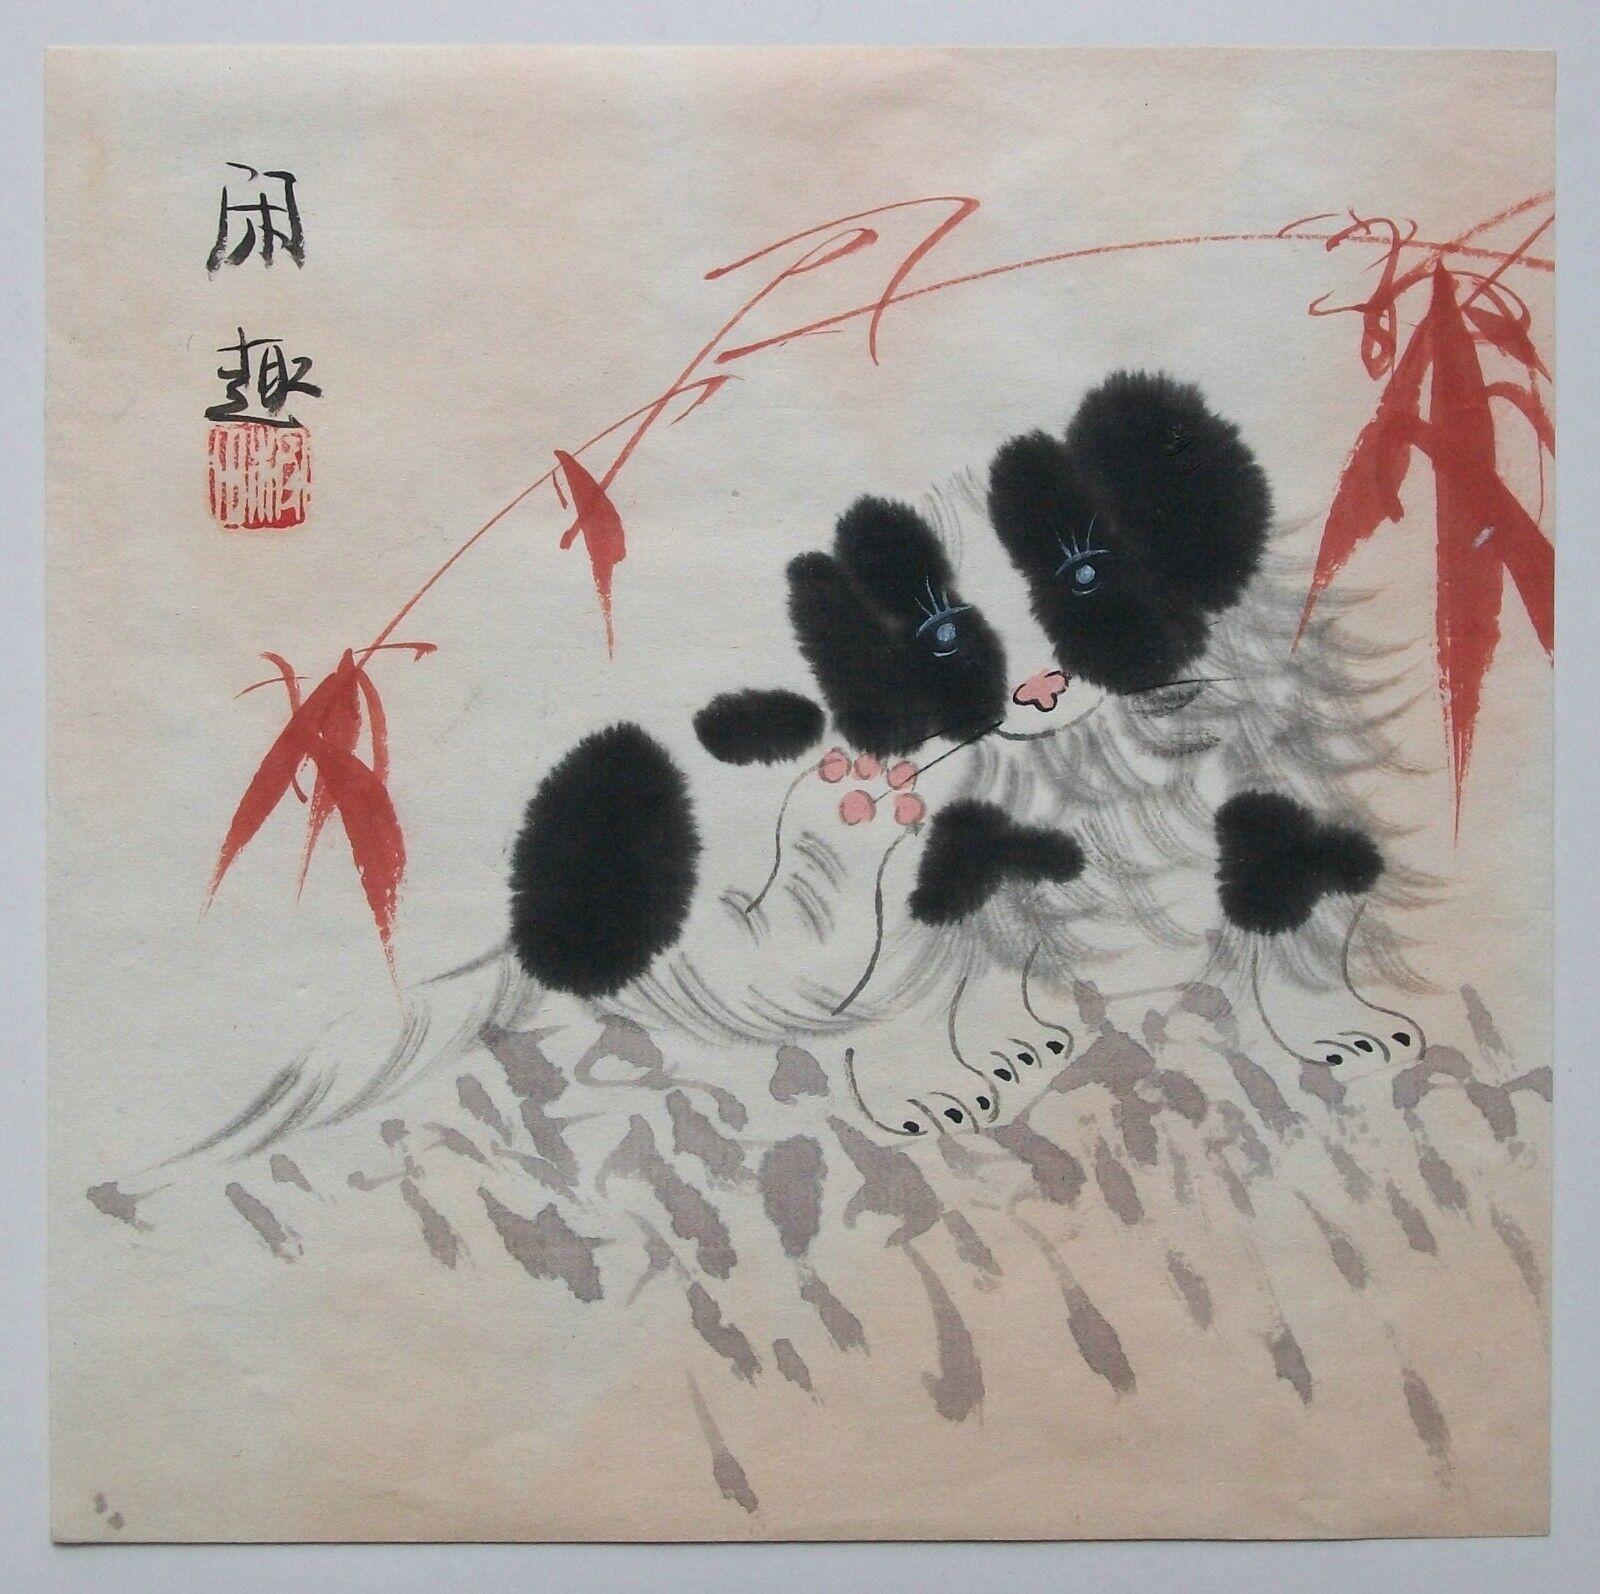 XIANG TIAN - 'Relaxing' - Vintage watercolor painting on paper - nice quality and composition - signed with a single red chop mark and Chinese characters (upper left) - signed and titled verso - mounted to card (upper right corner only) - unframed -